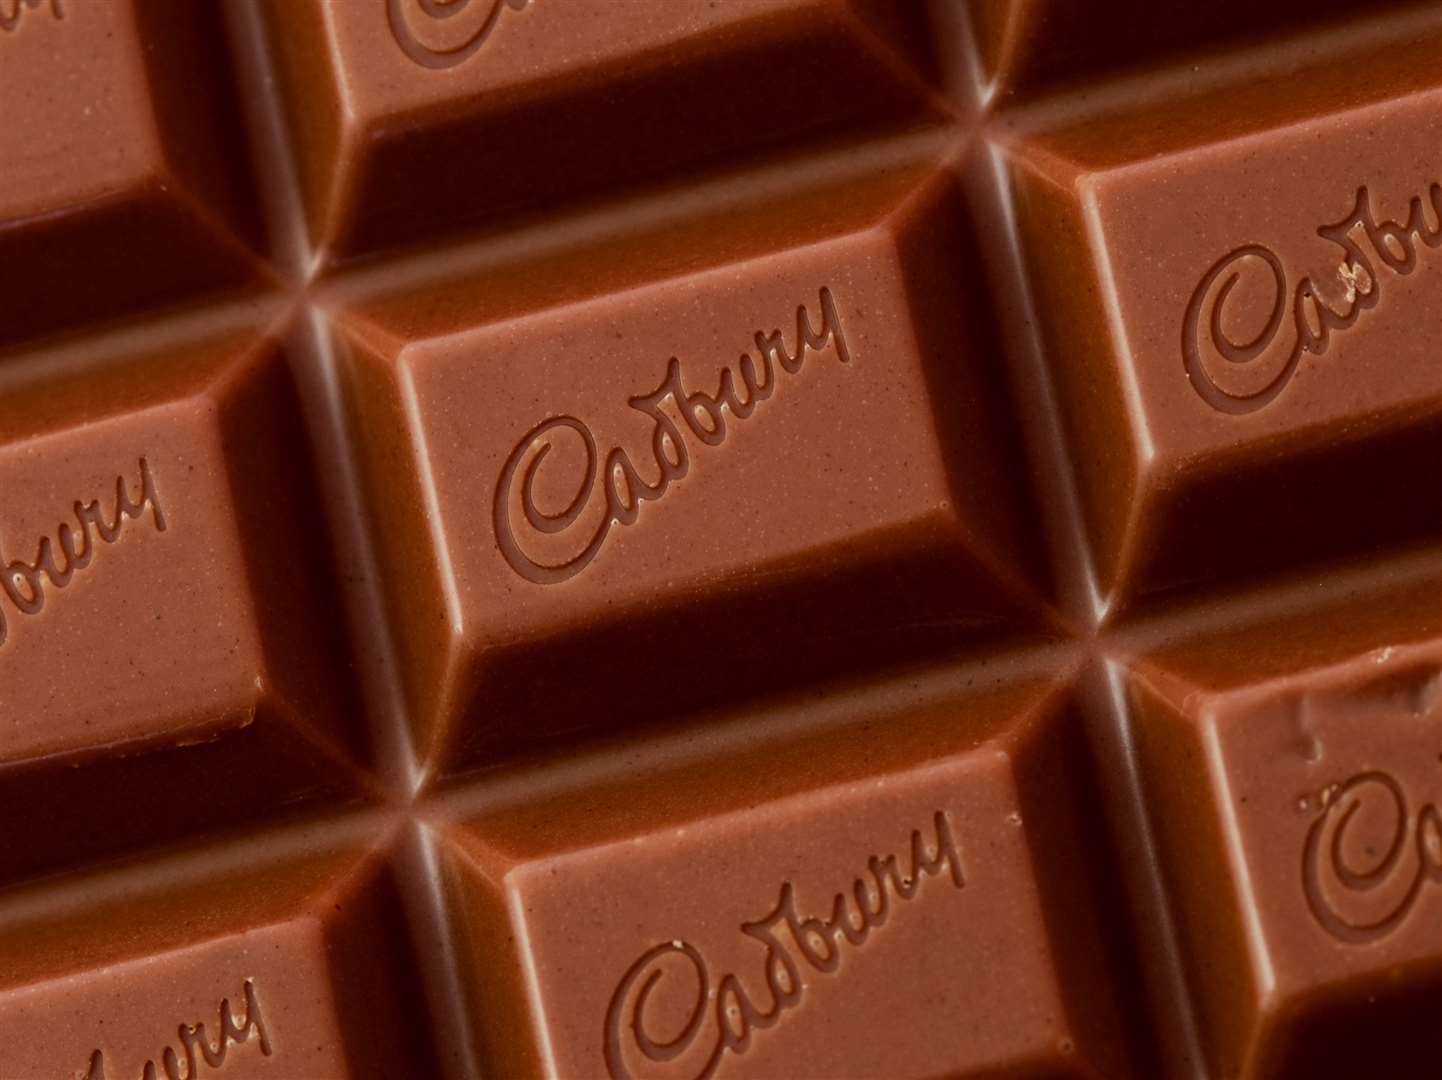 Cadbury is celebrating its 200th anniversary – while the first Dairy Milk chocolate bars were first produced in the UK in 1905. Image: iStock.